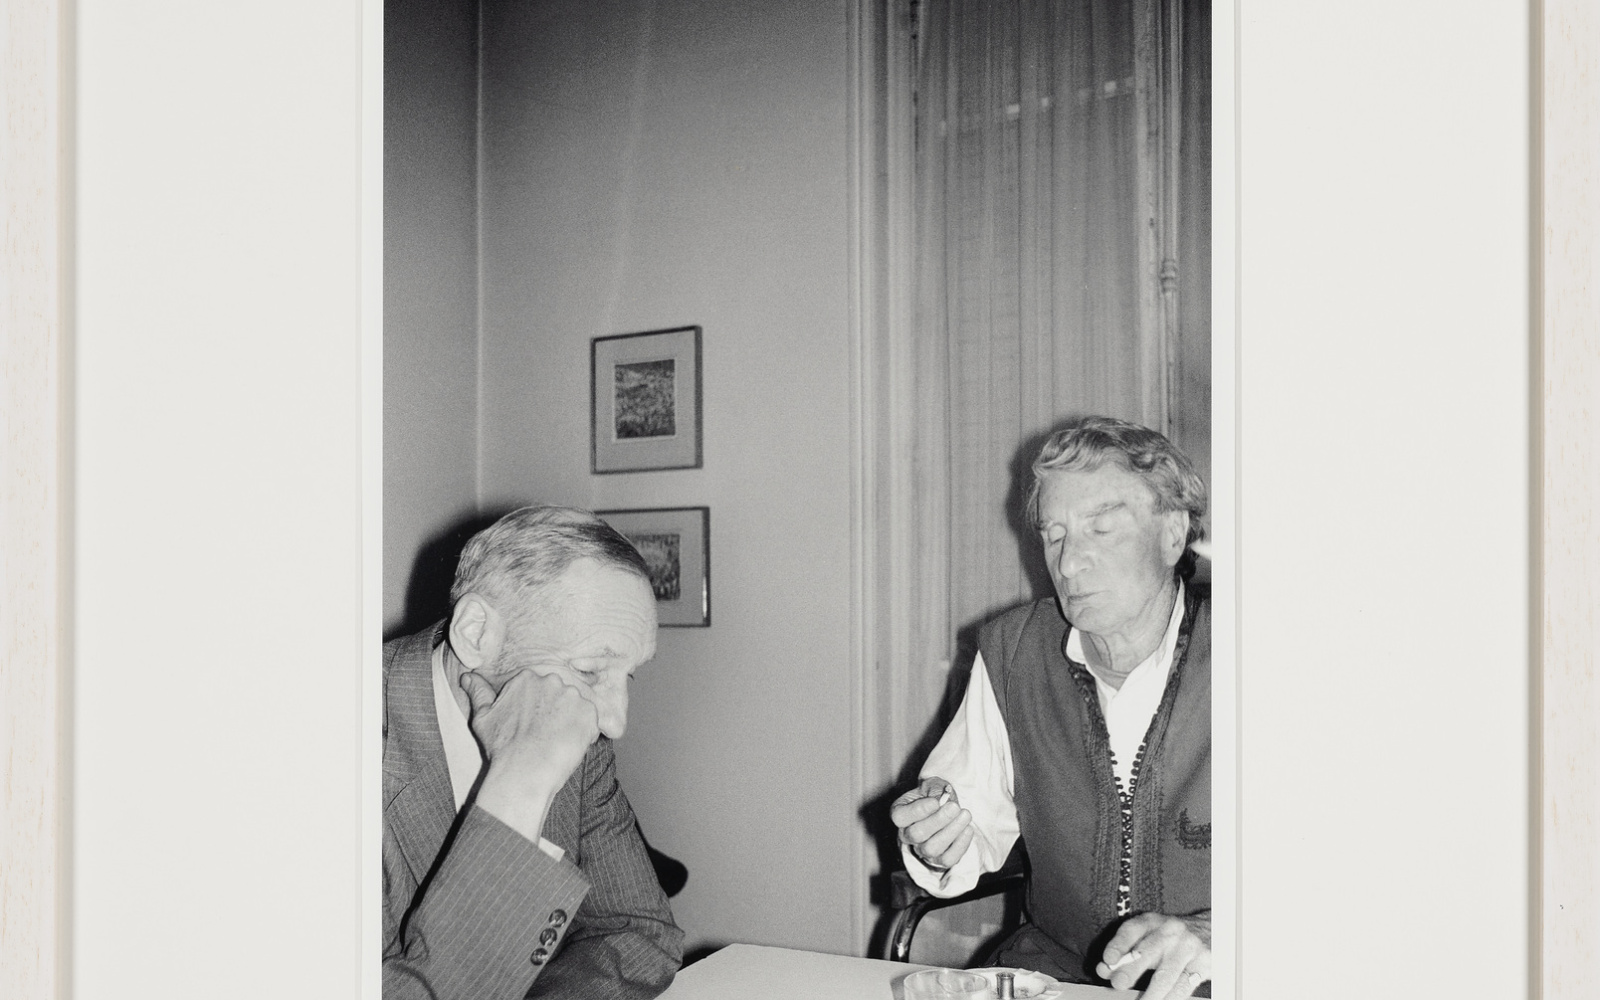 William Burroughs and Brion Gysin after dinner, with empty plates cleared away, or maybe before dinner, with empty whiskeys and a slim spliff passed around